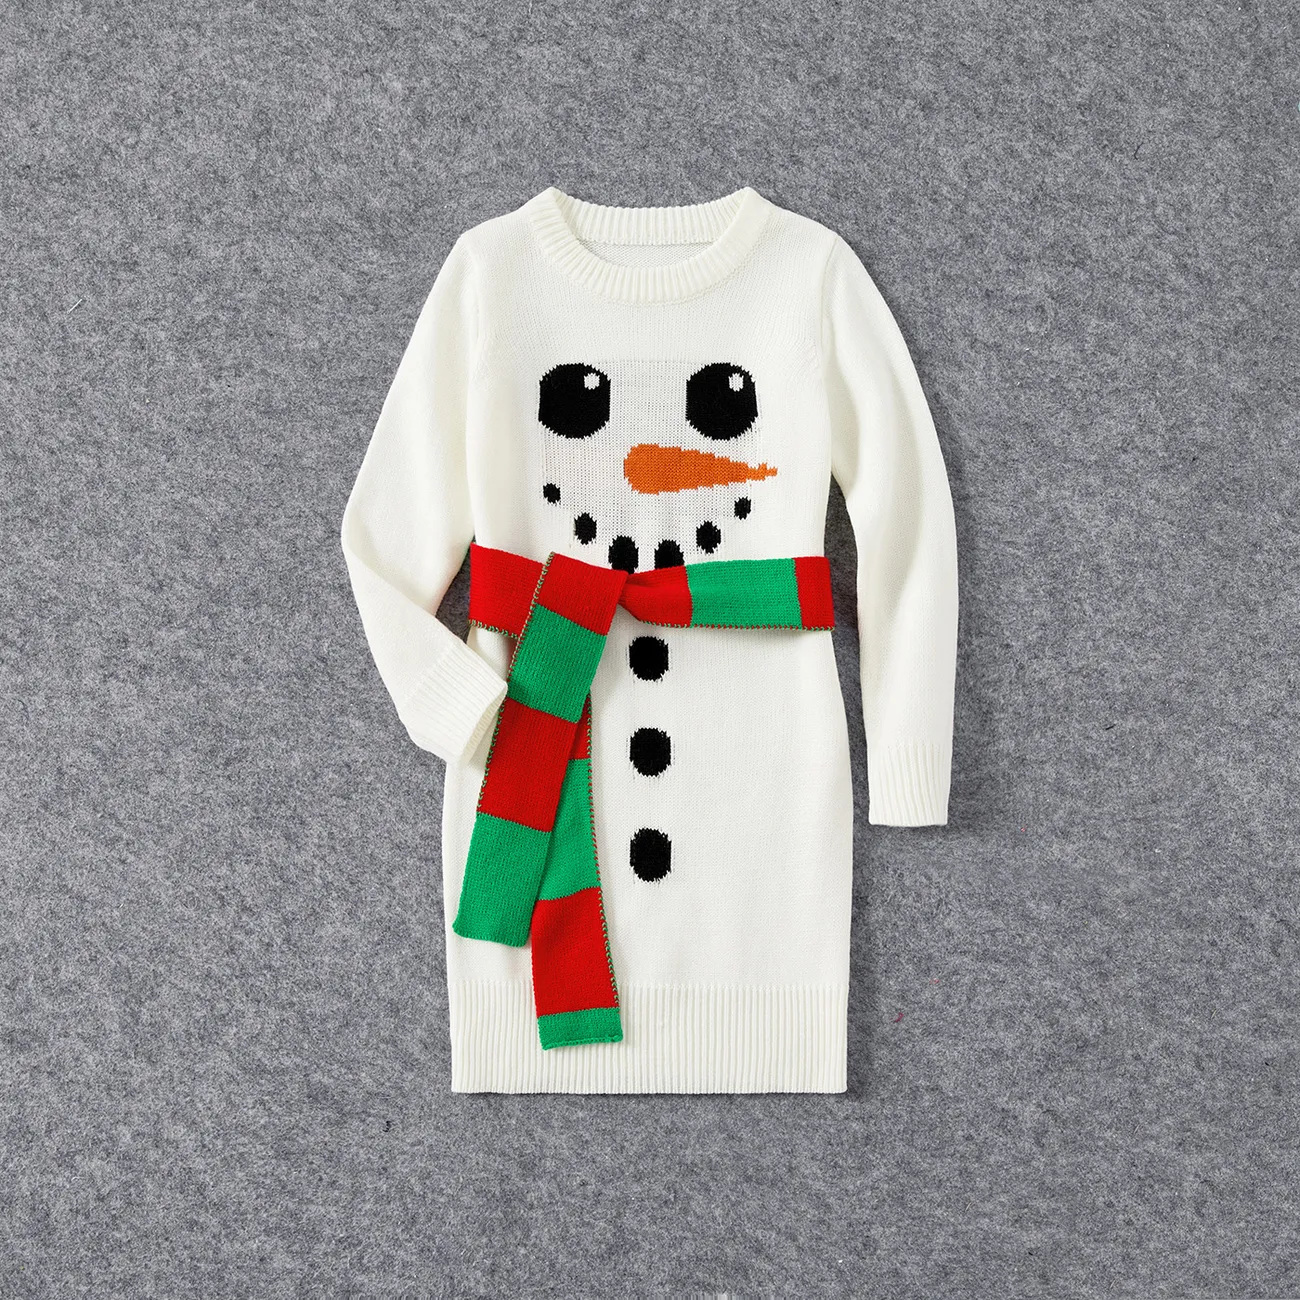 Christmas Family Matching Snowman Graphic White Knitted Belted Dresses and Tops Sets White big image 1